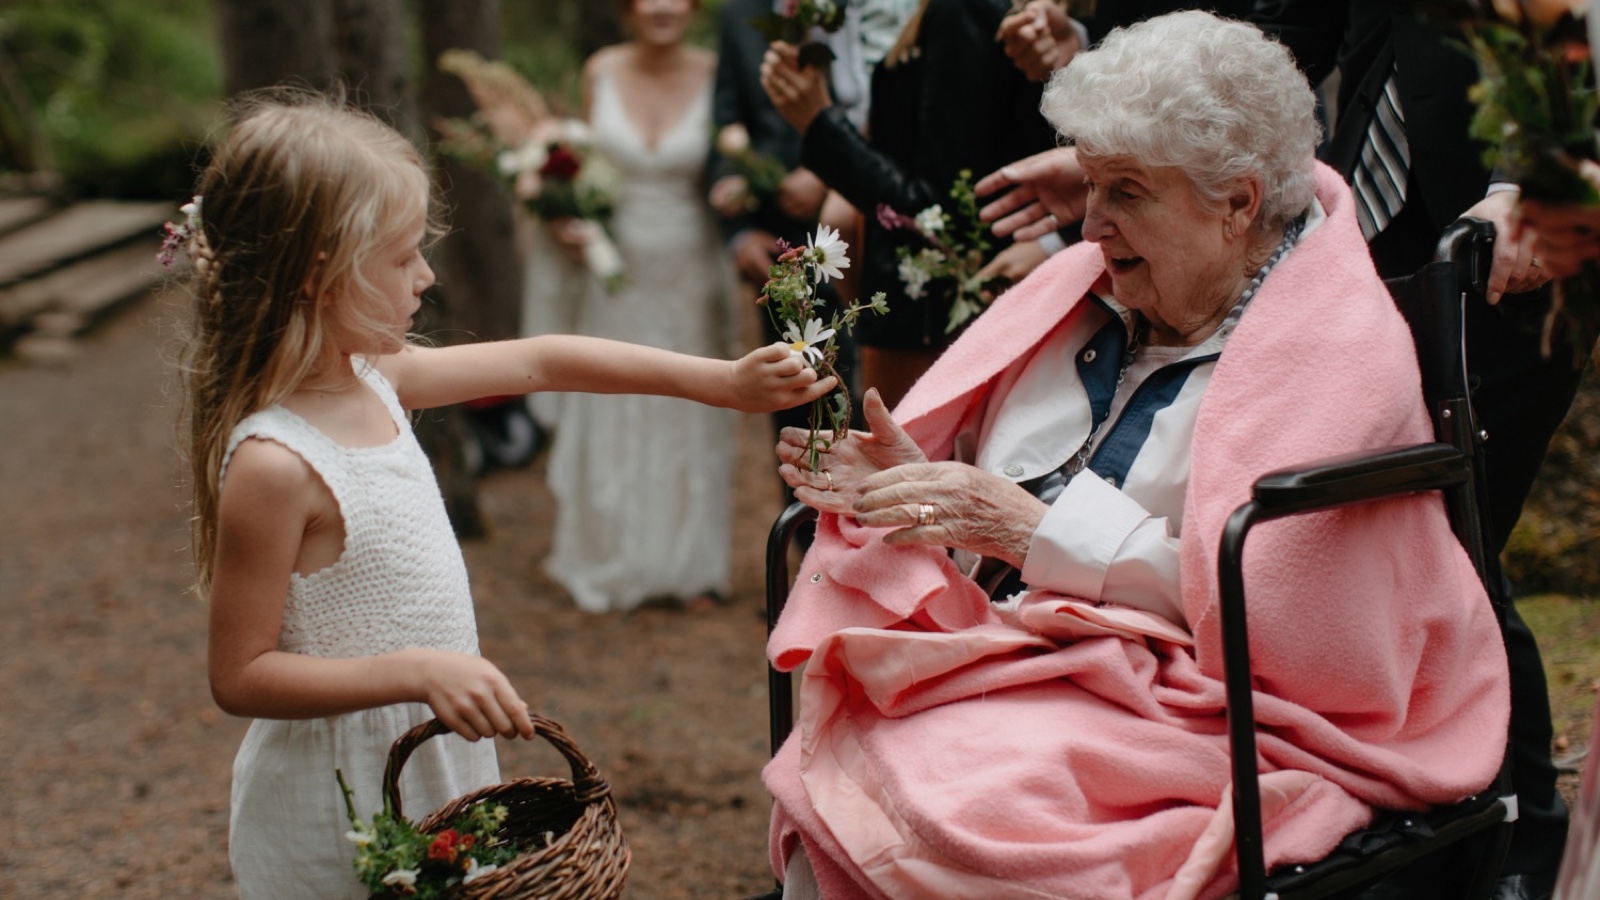 Flower girls handing small organic floral arrangements to each guest before the wedding ceremony